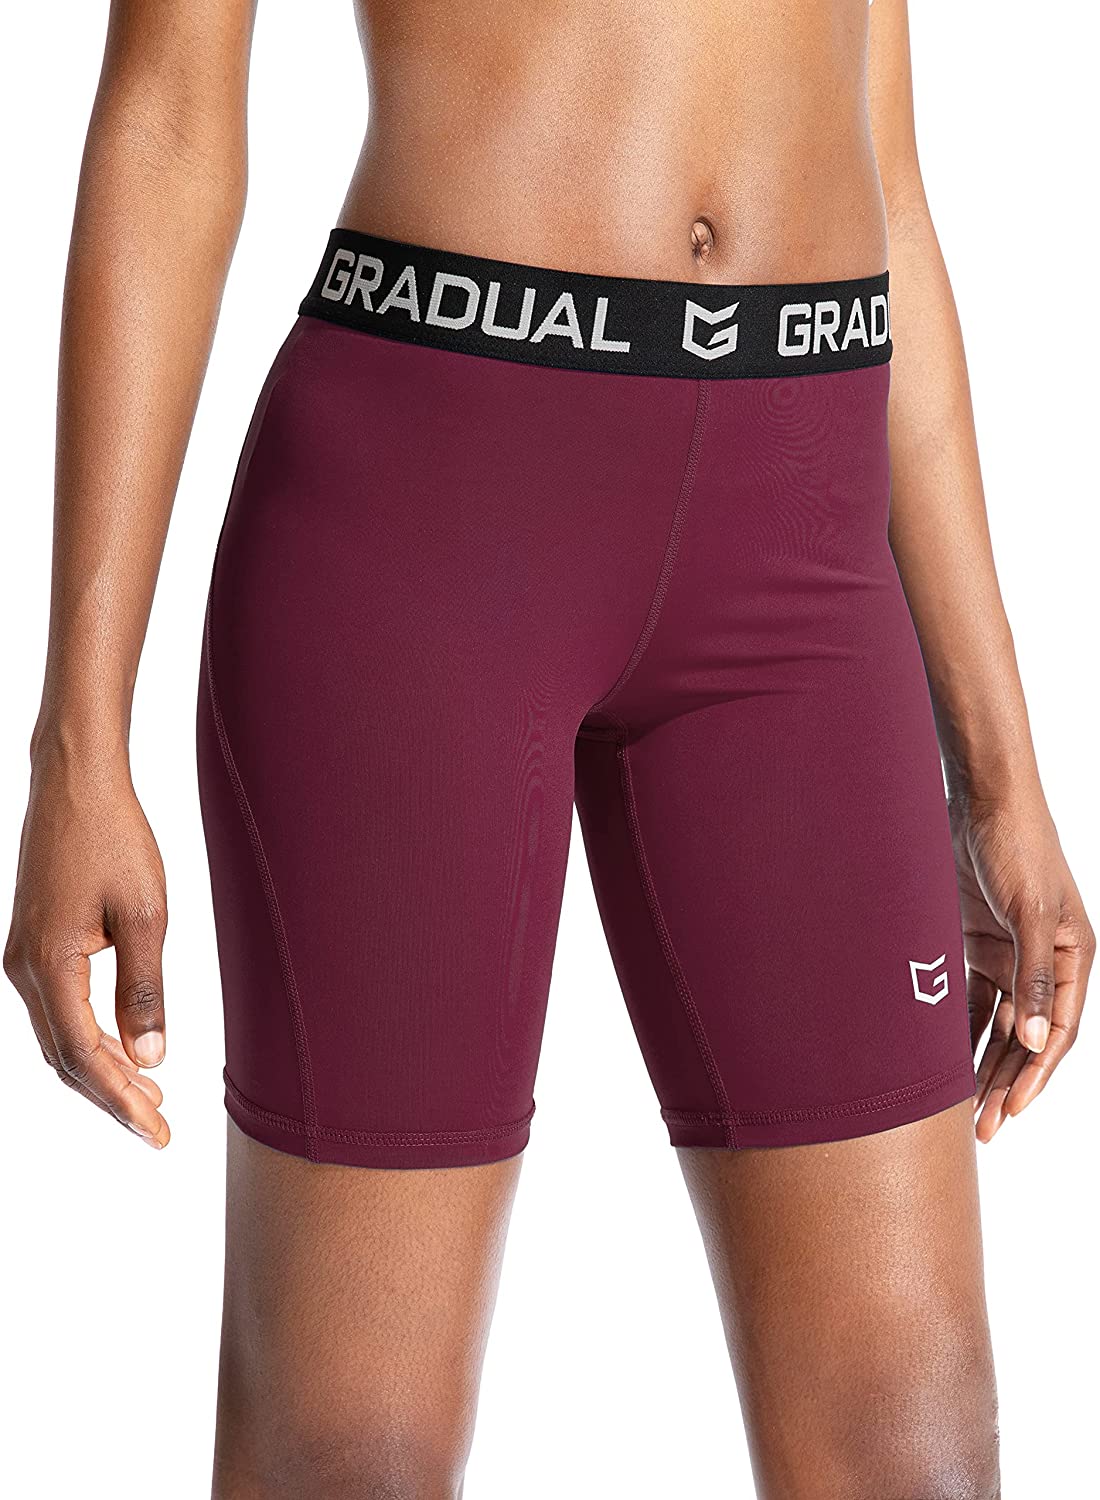 Buy G Gradual Women's Spandex Compression Volleyball Shorts 3 Workout Pro  Shorts for Women (3 Pack:Black/Black/Black, XS) at